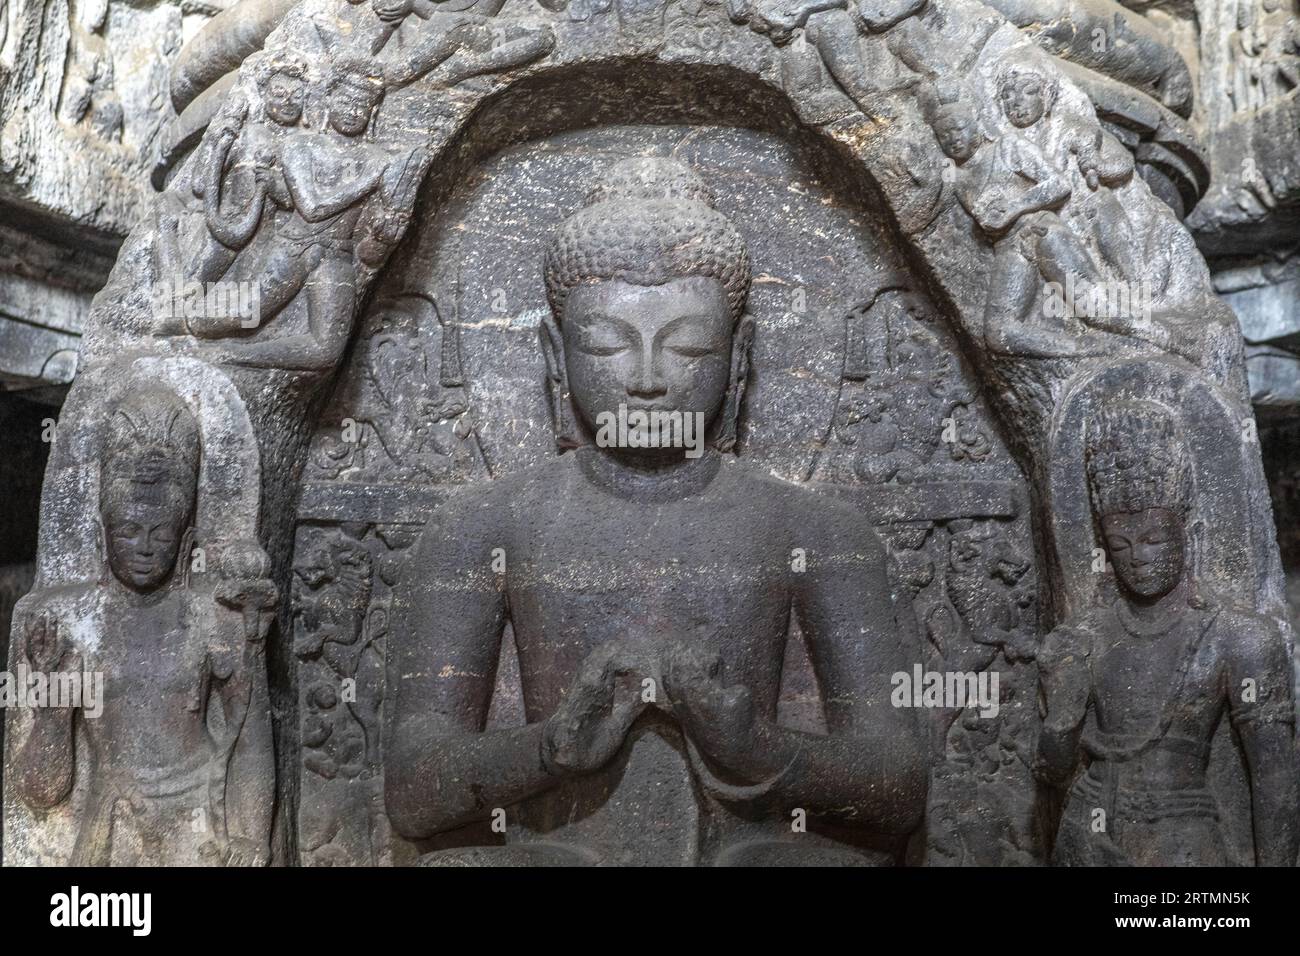 Ellora caves, a UNESCO World Heritage Site in Maharashtra, India. Cave 10.  Teaching Buddha, seated in the bhadrasana pose on a lion throne. The main Stock Photo